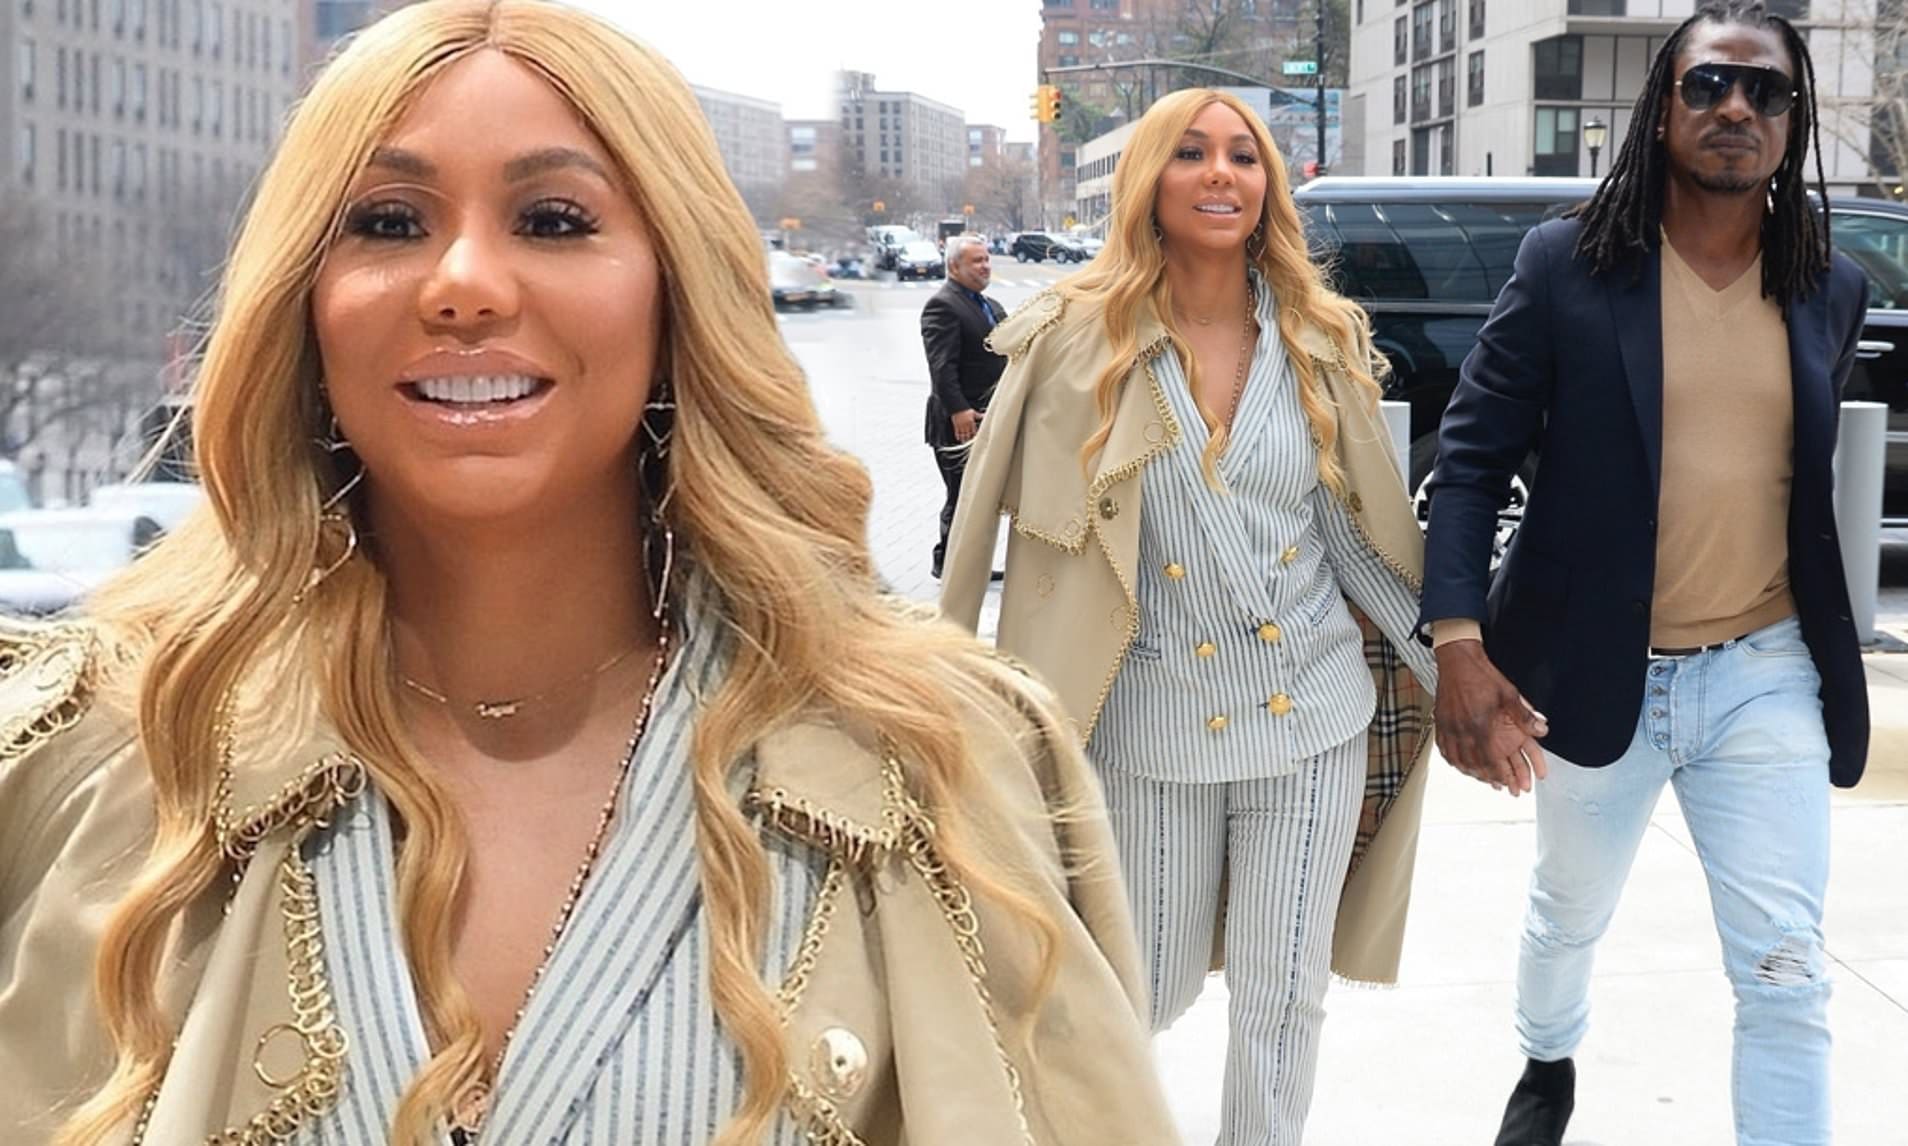 Tamar Braxton's Boyfriend David Adefeso Publicly Professes His Love For Her: 'Together Forever'